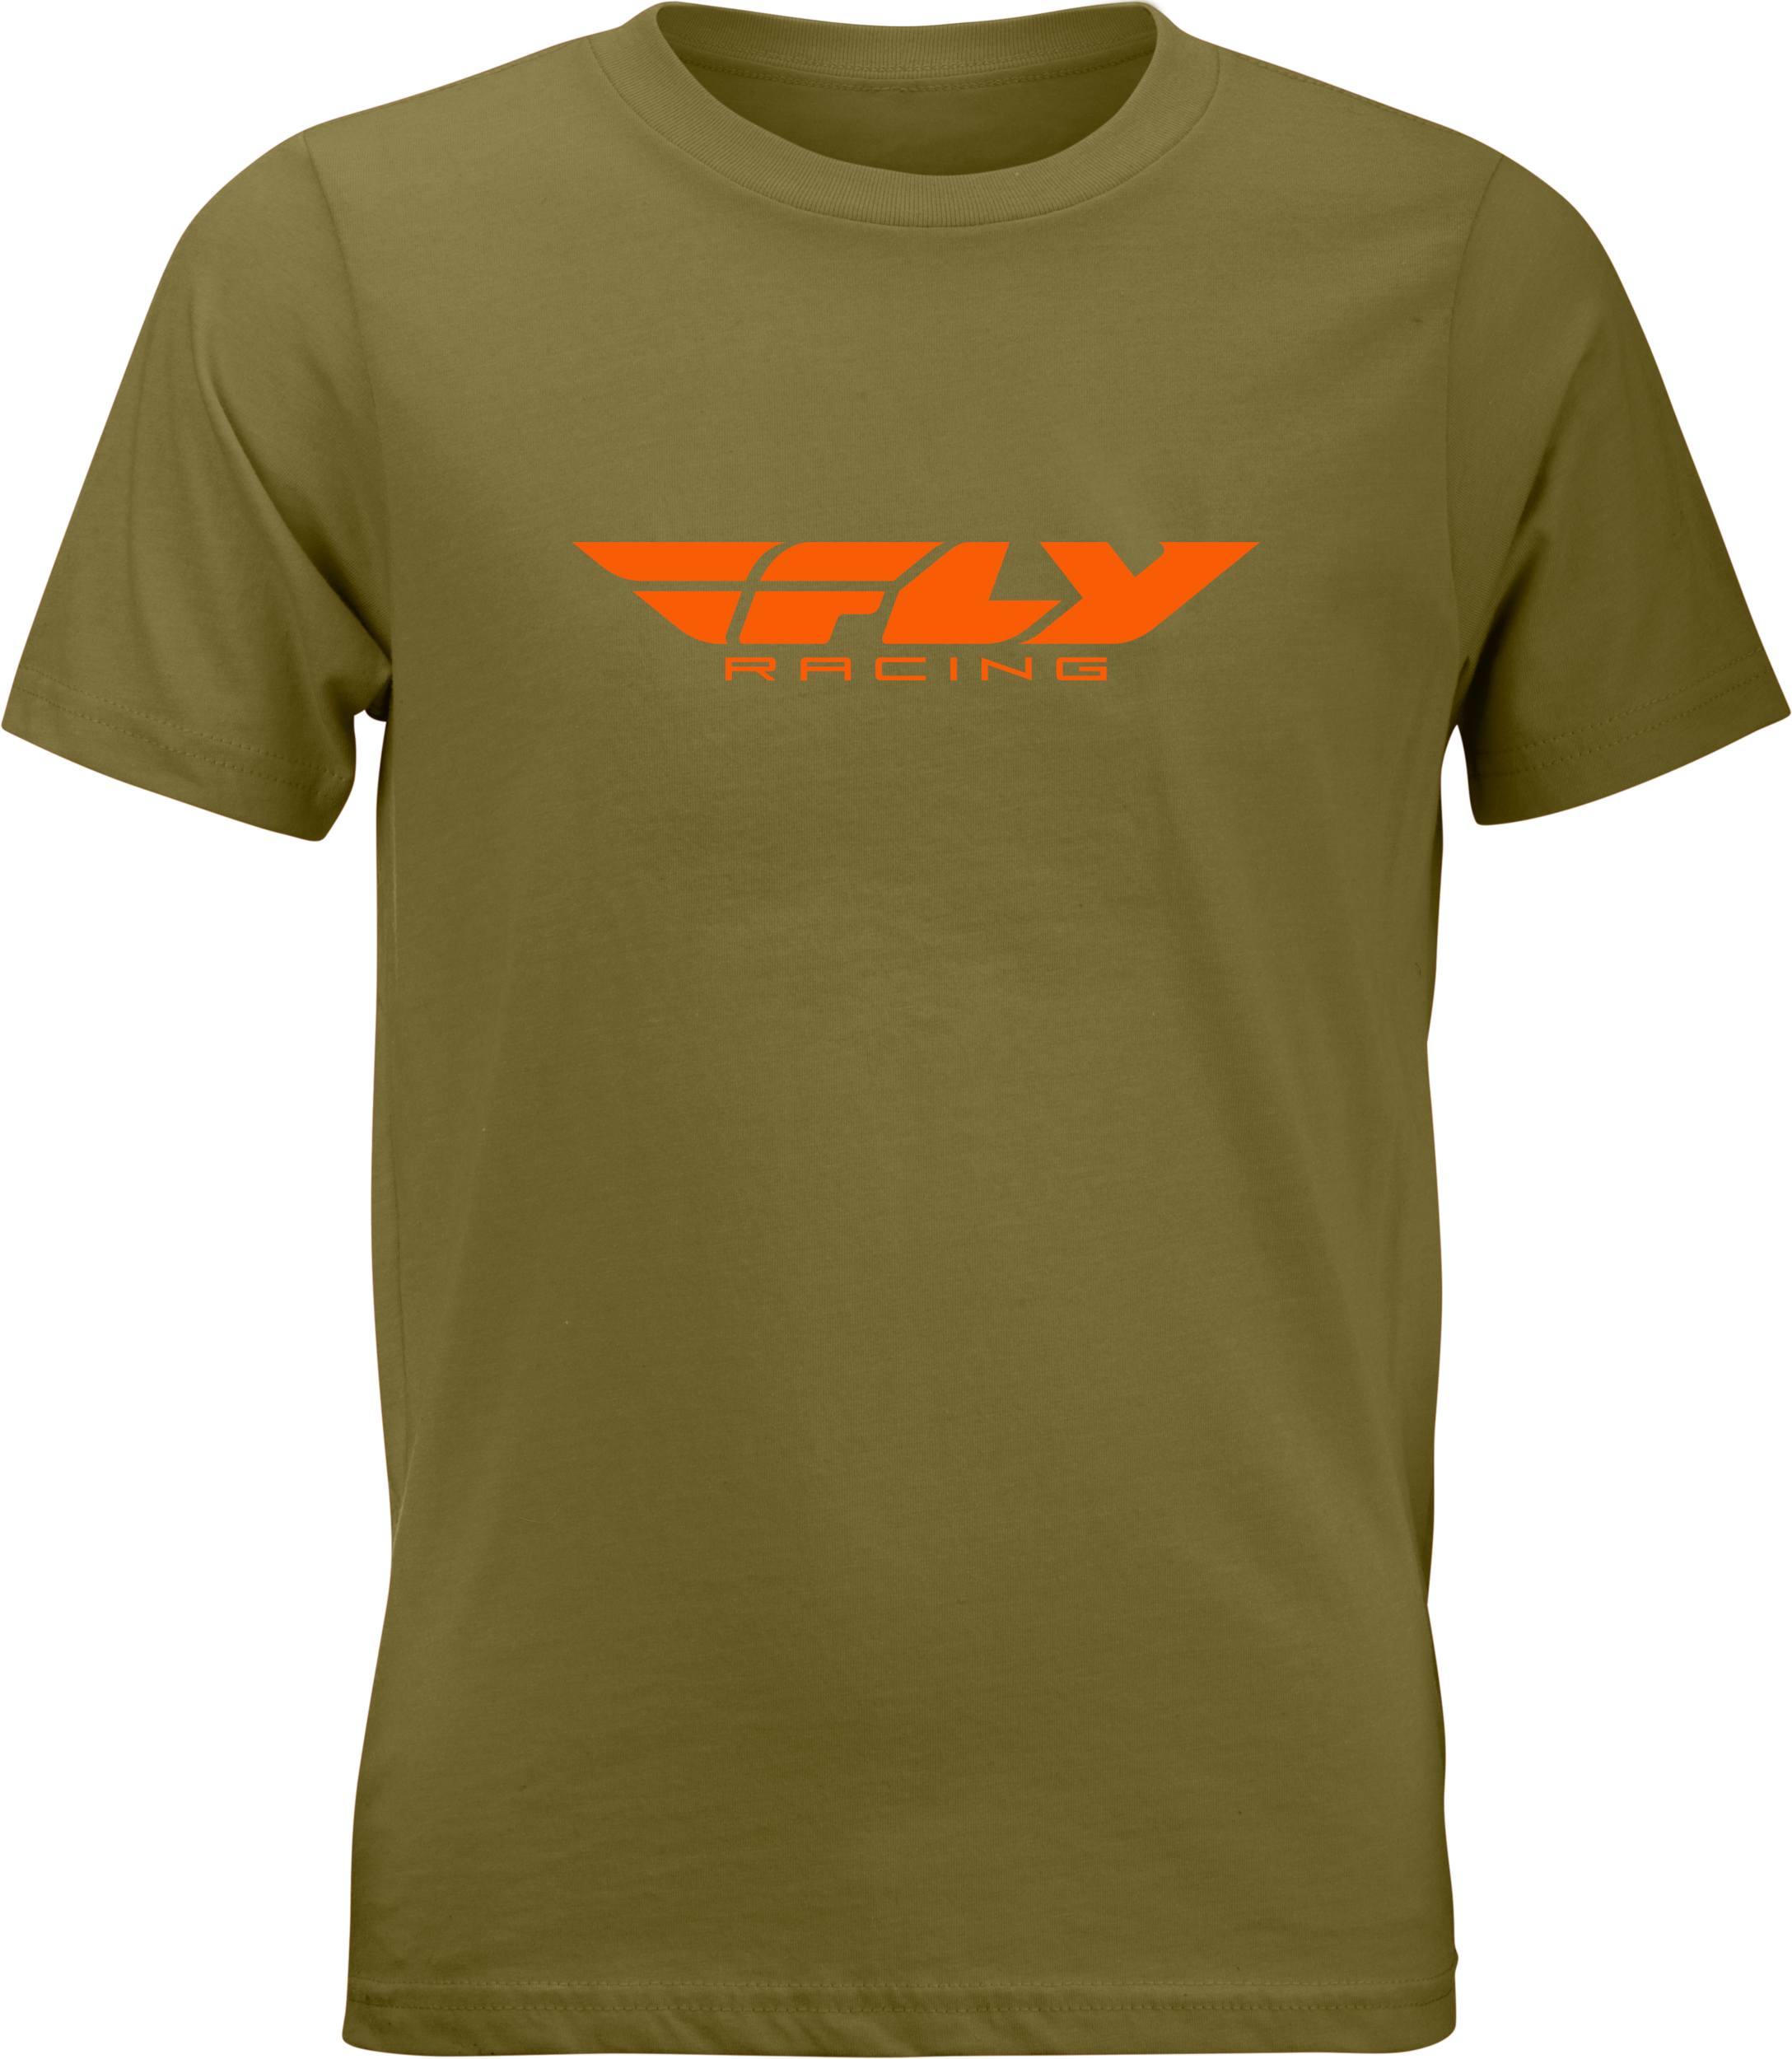 Youth Fly Corporate Tee Olive/Orange Yl